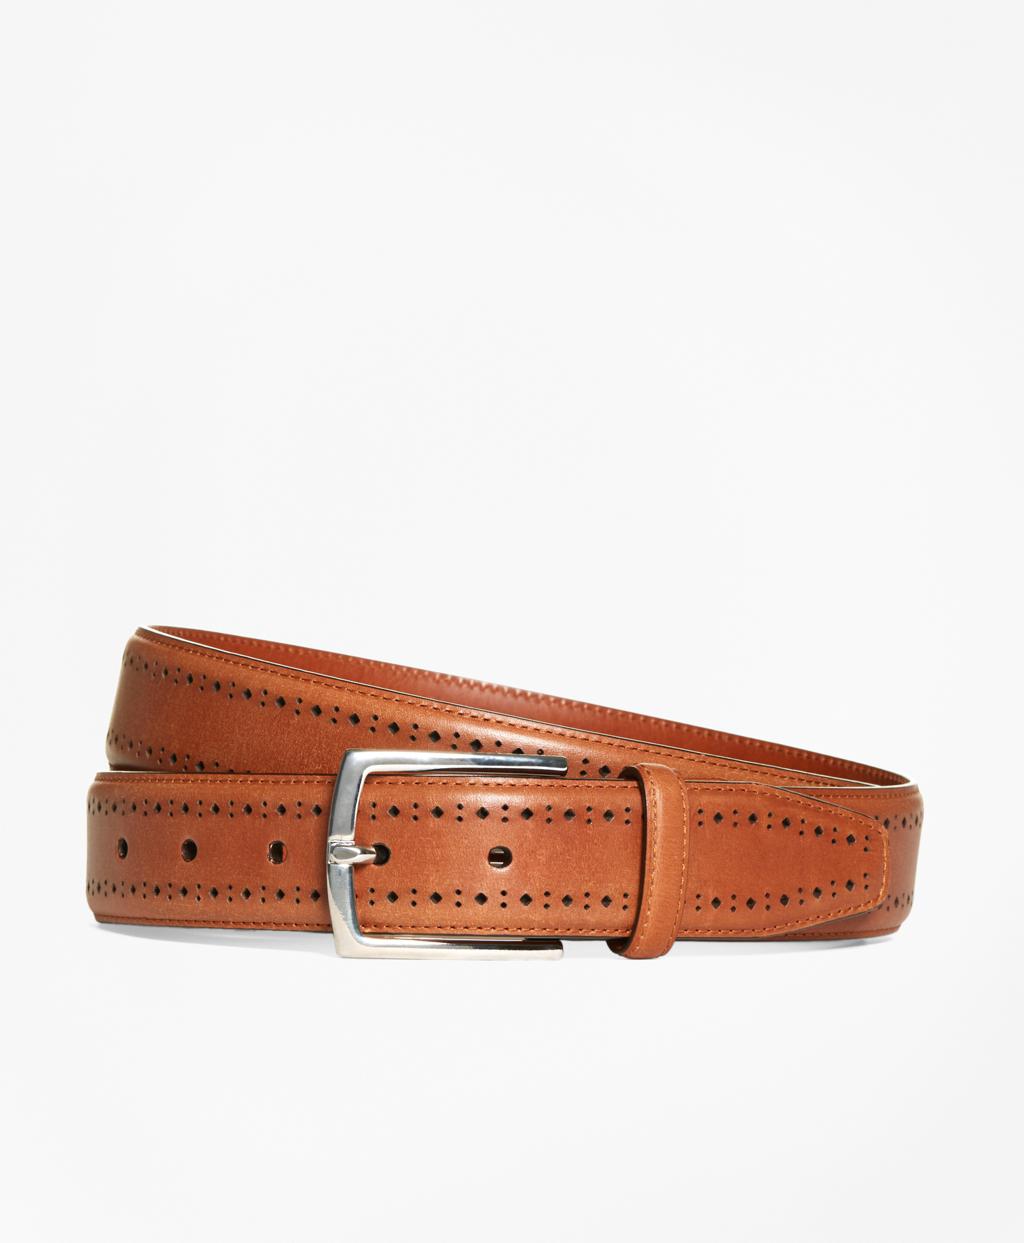 Lyst - Brooks Brothers Leather Perforated Belt in Brown for Men